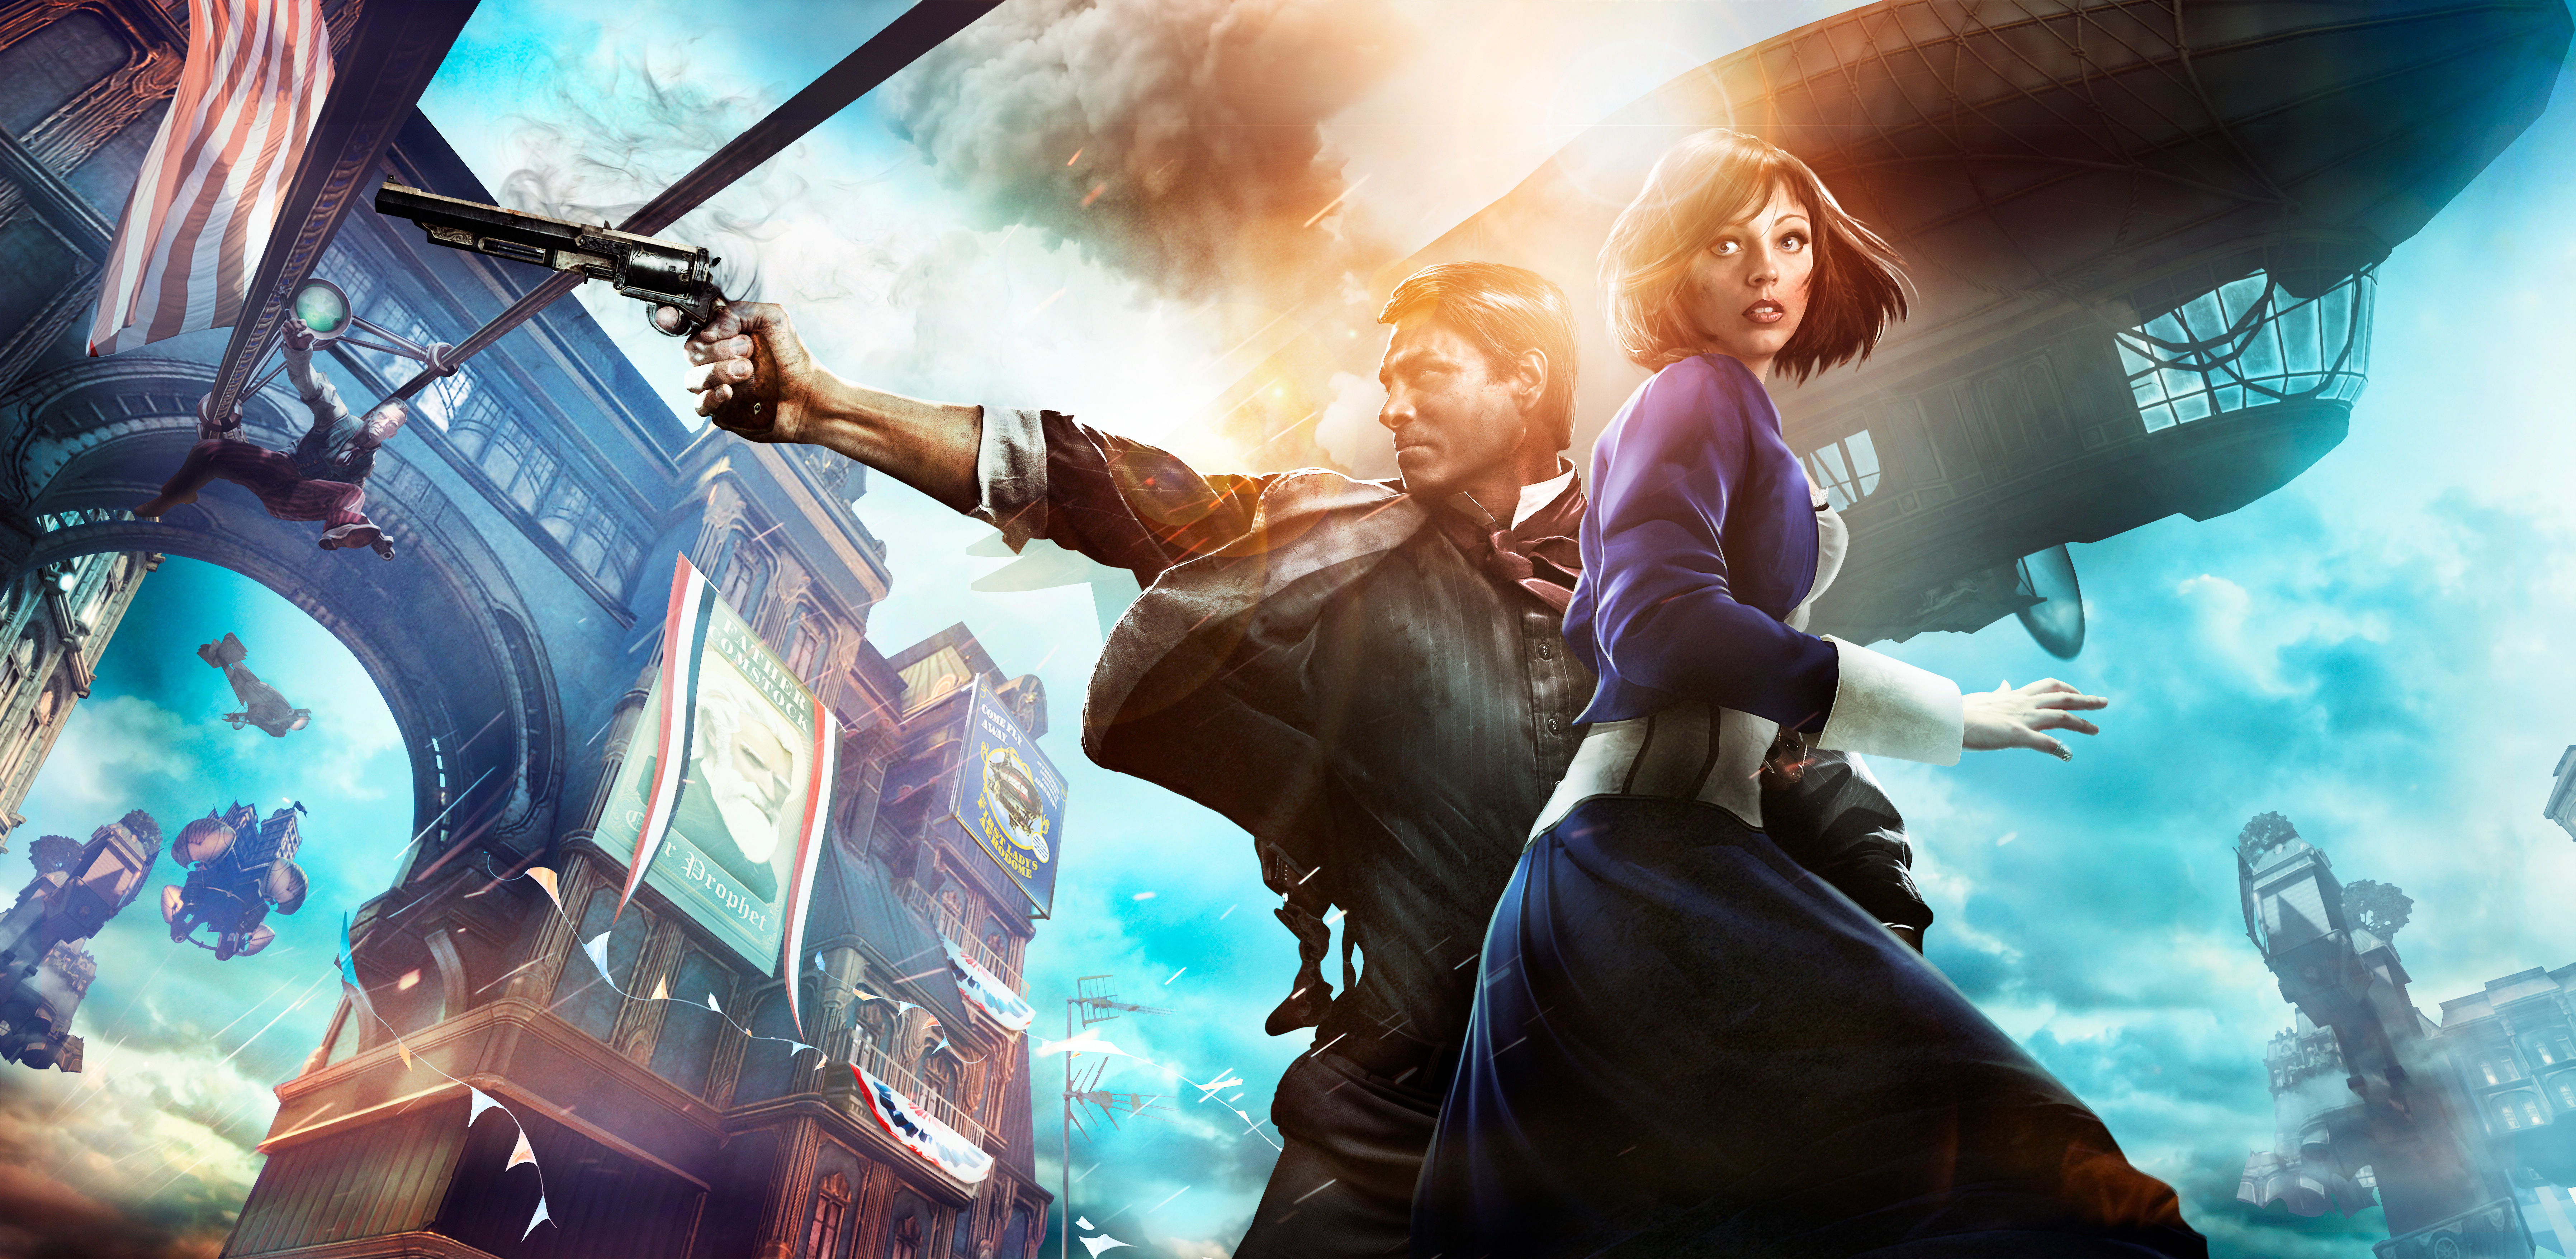 180+ Bioshock Infinite HD Wallpapers and Backgrounds